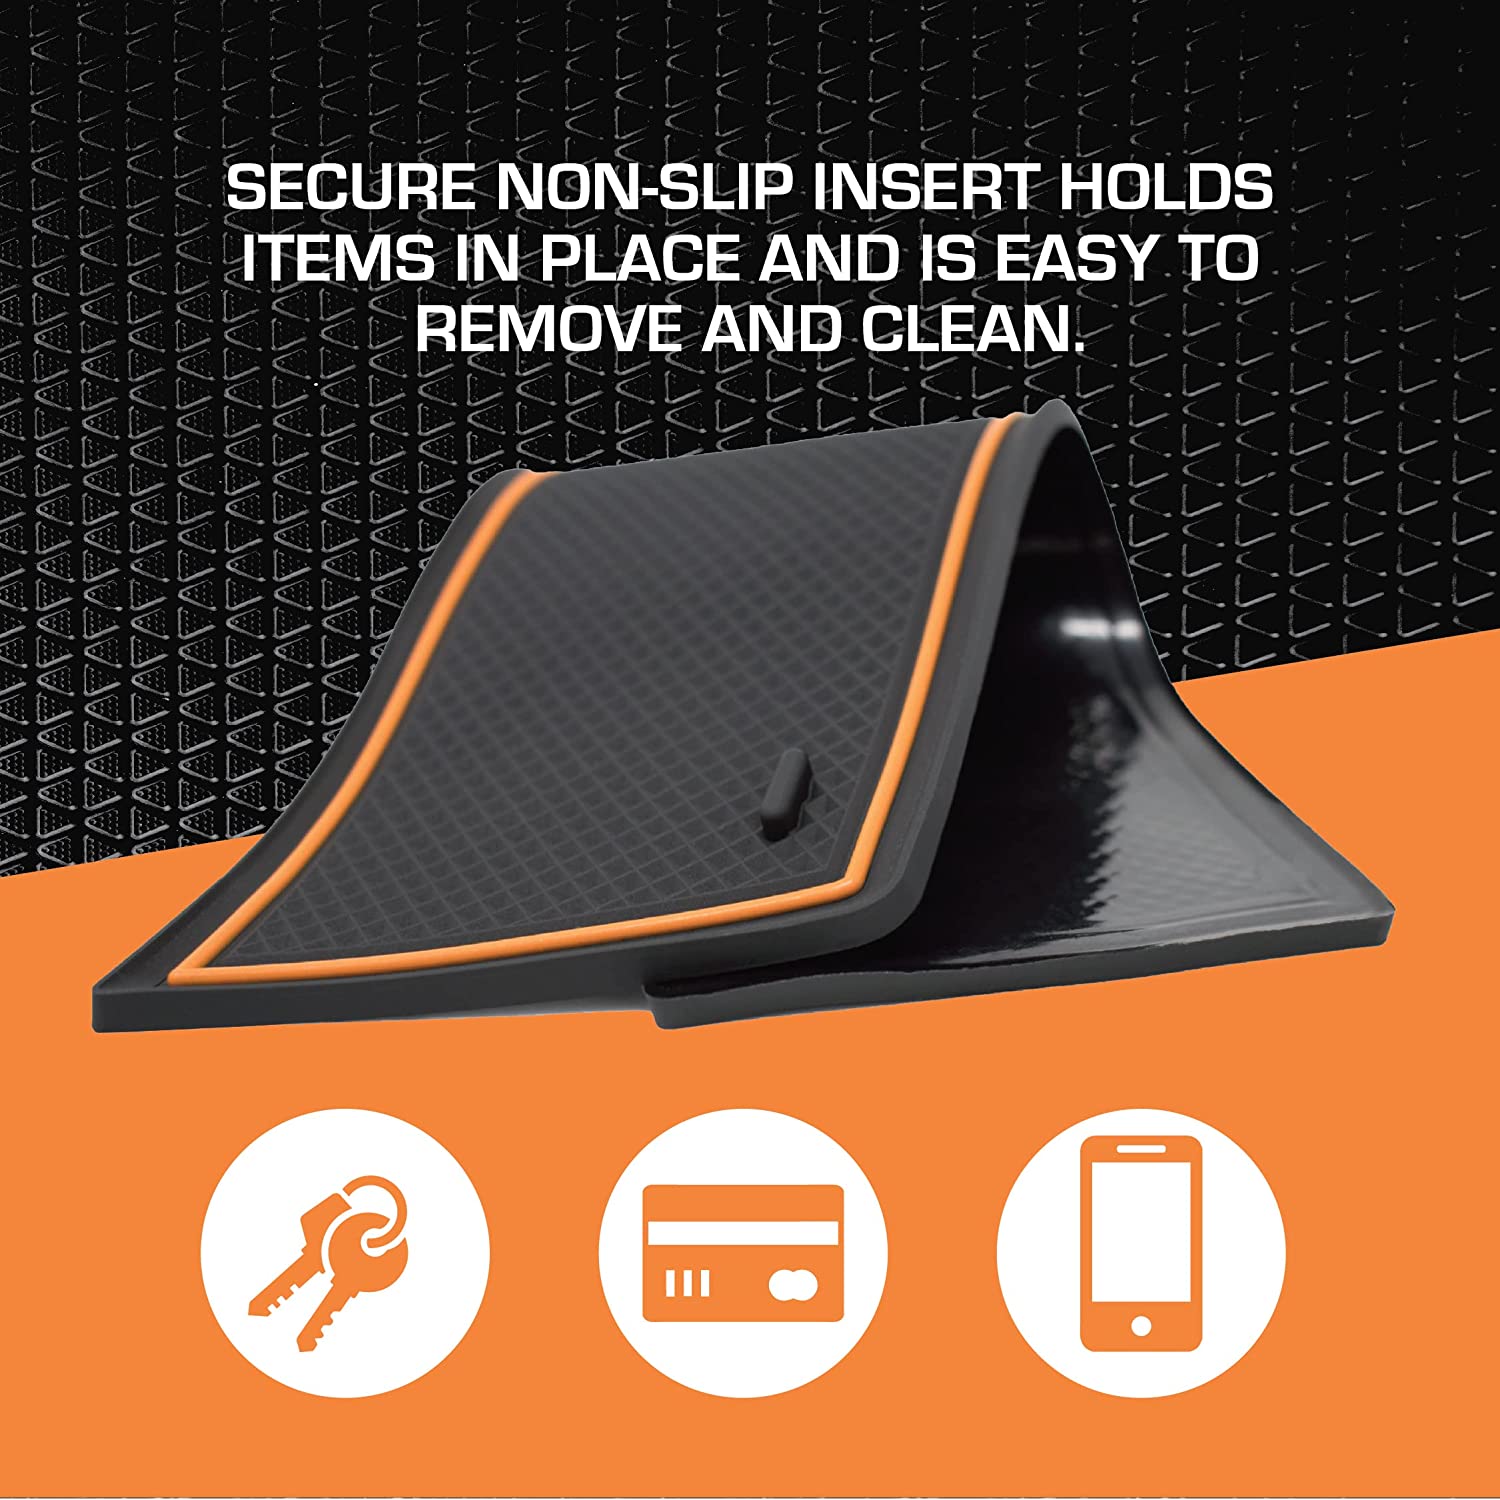 CupHolderHero Universal Multifunction Tray & Removable Liner Mat - Car & Truck Accessories - Non Slip Anti Dust Surface to Enhance Cup Inserts - Fits Most Vehicle Interiors (Orange Trim)